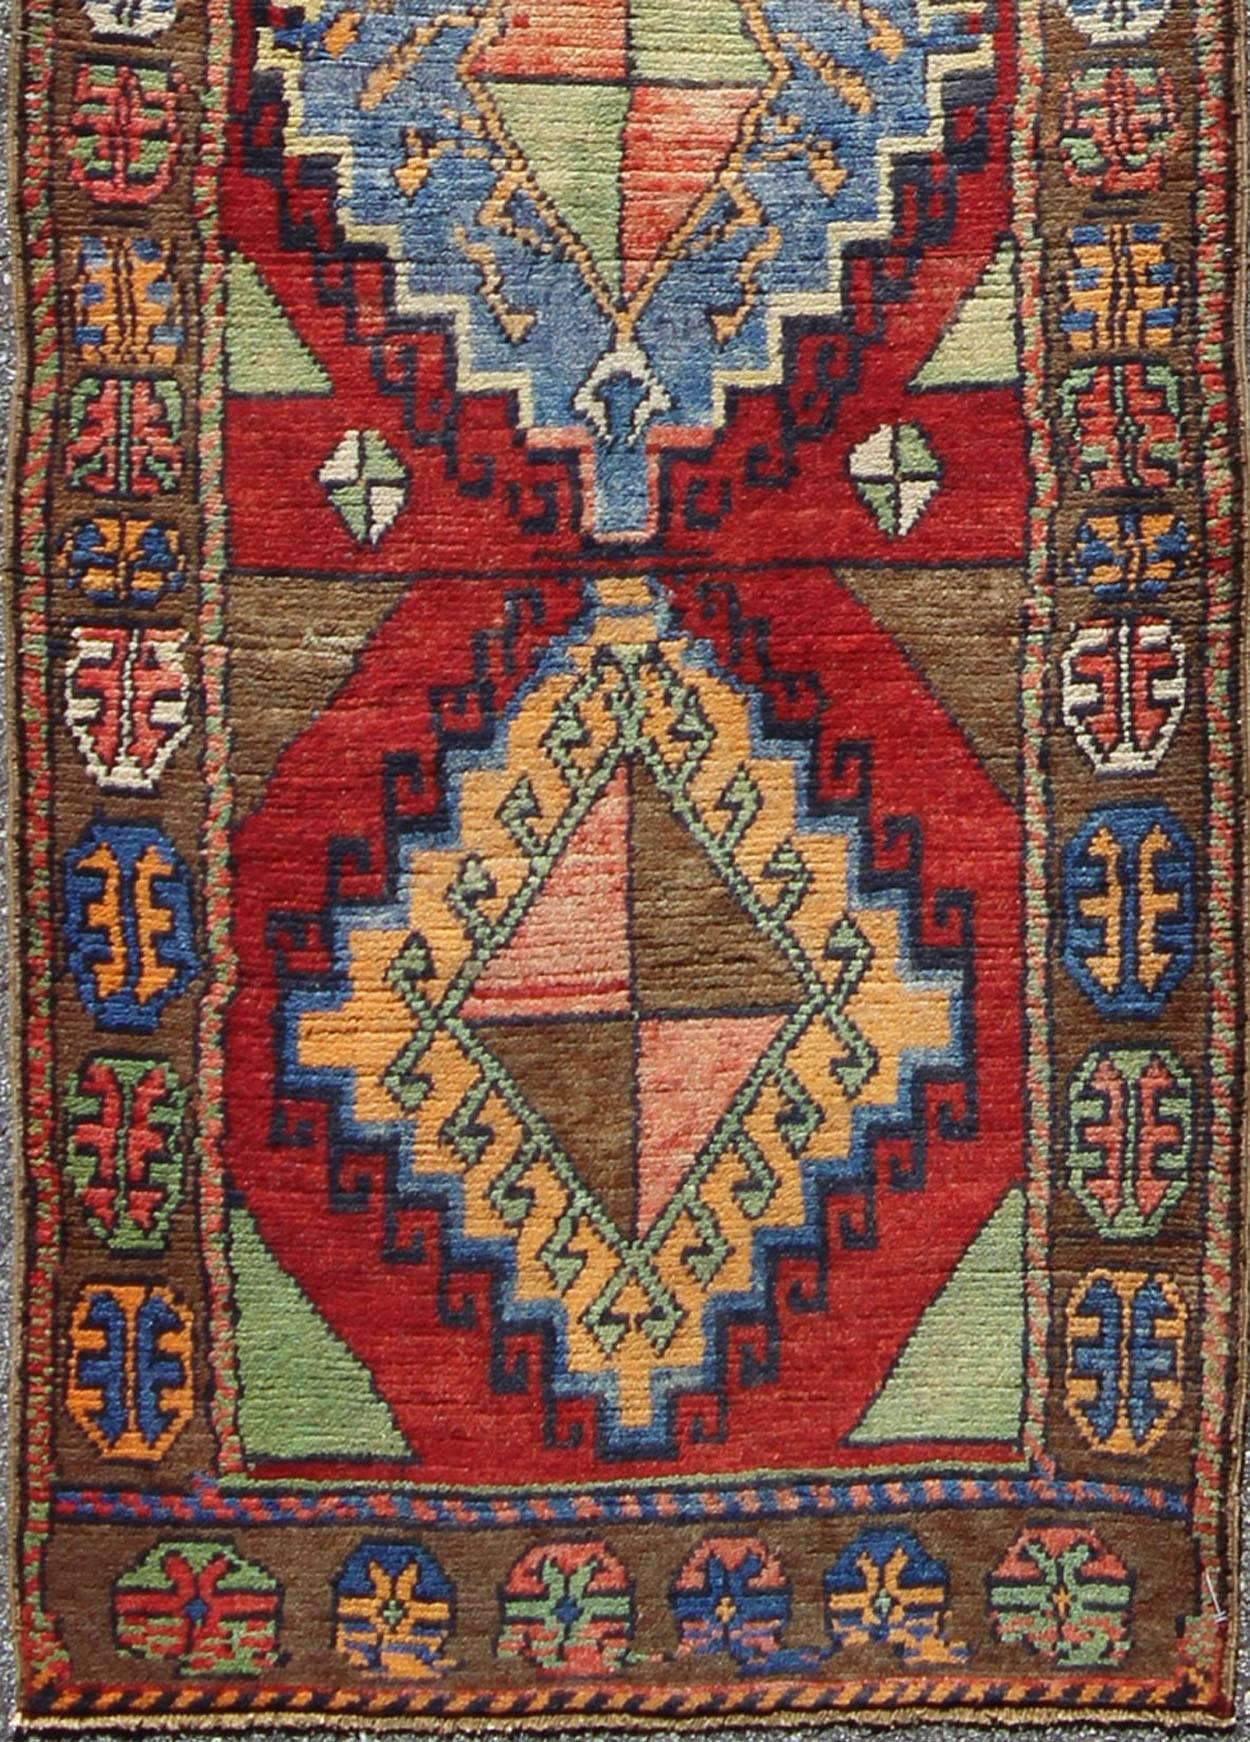 Hand knotted vintage Turkish Oushak Runner with Geometric Tribal design, Keivan Woven Arts / TU-VEY-4608, mid-20th century. Turkish oushak vintage Runner.

This vintage Turkish Oushak runner features four medallions vertically arranged in the red